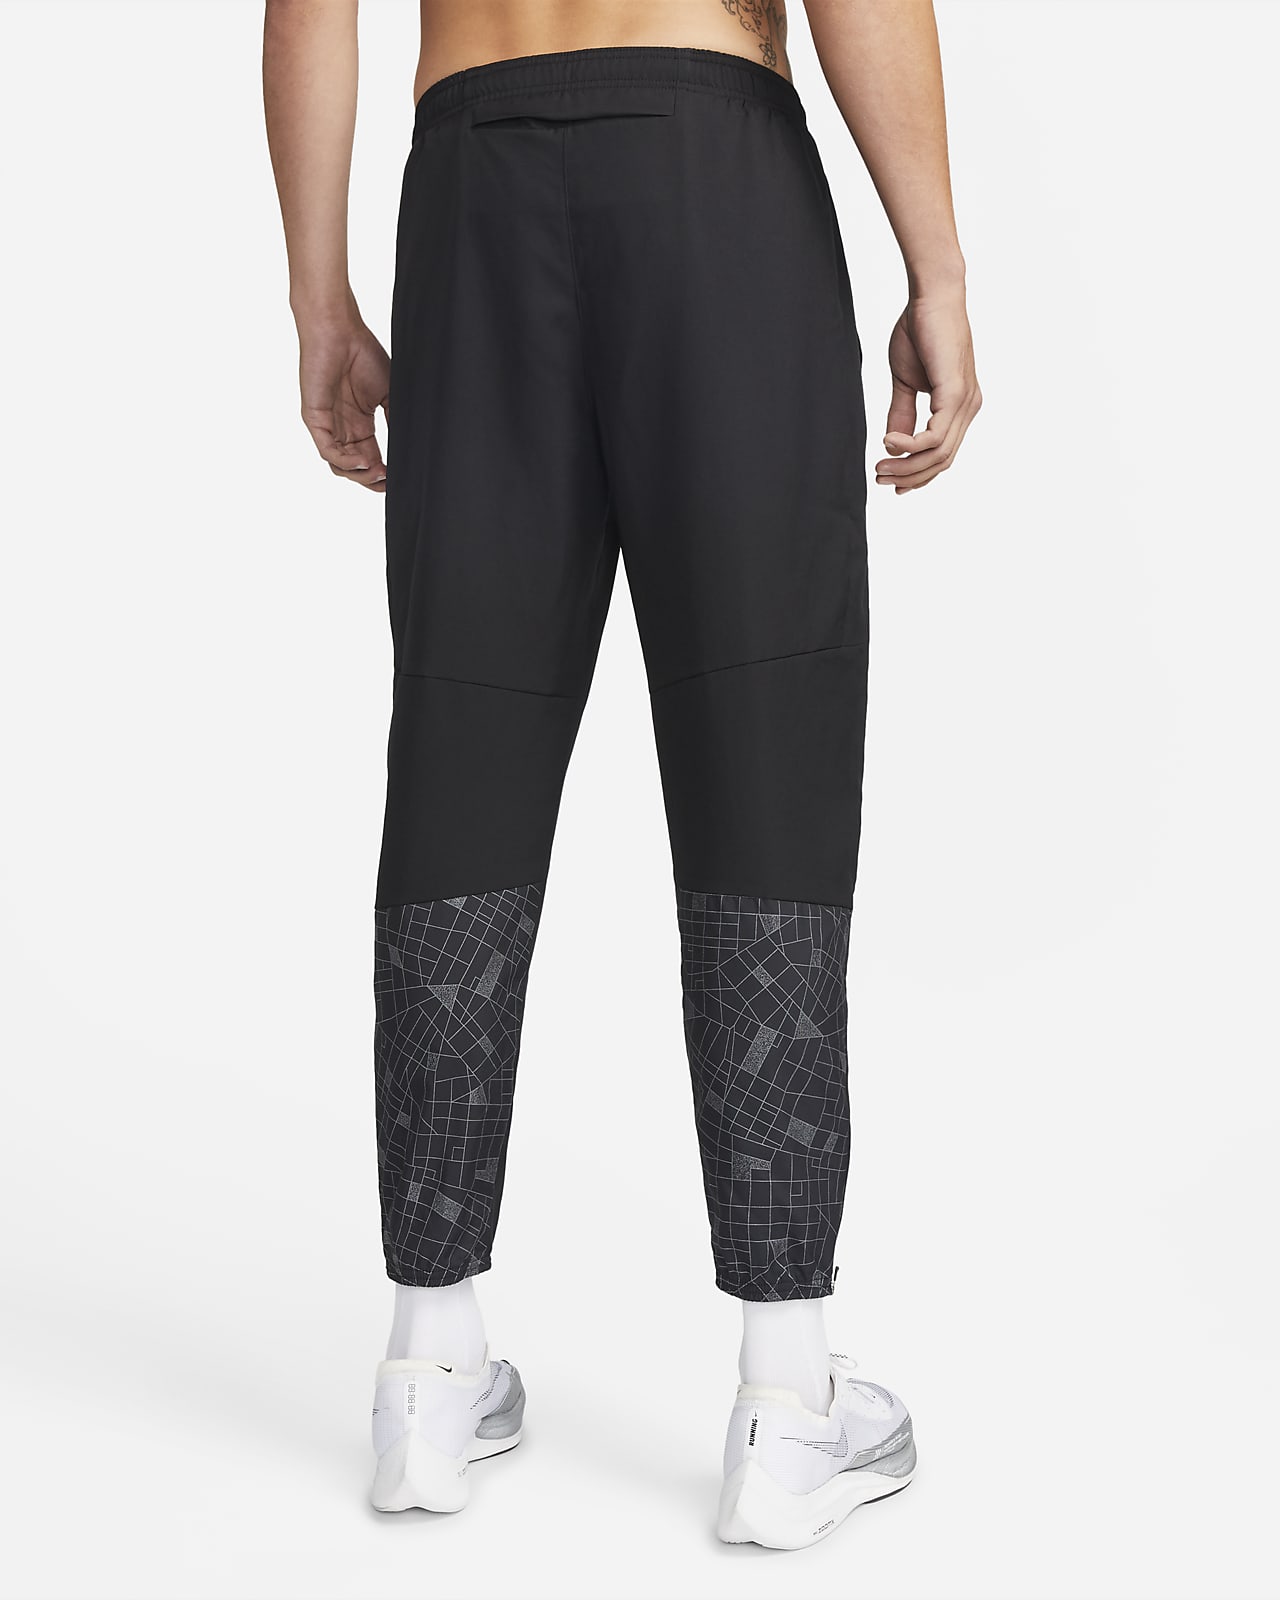 Nike Run Division Challenger Men's Woven Flash Running Trousers.